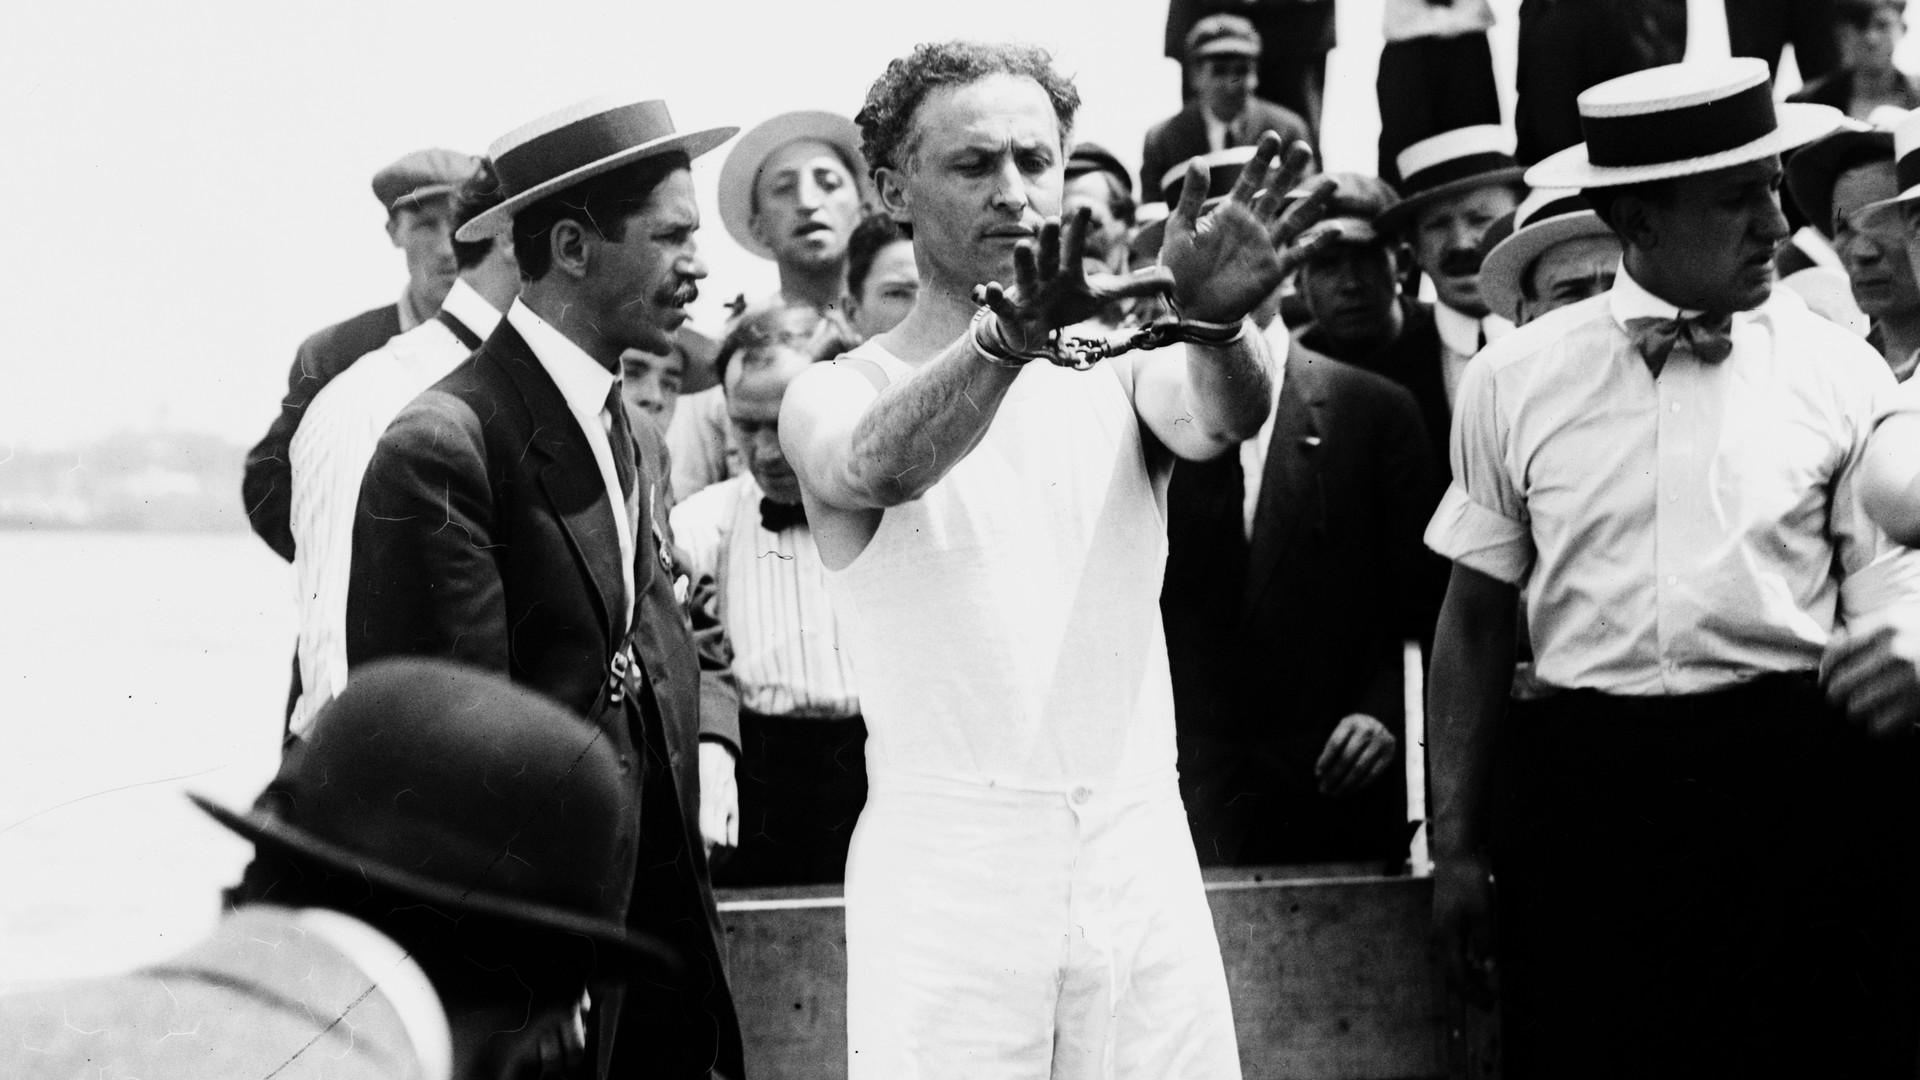 The main task was to defeat fear: illusionist Harry Houdini was